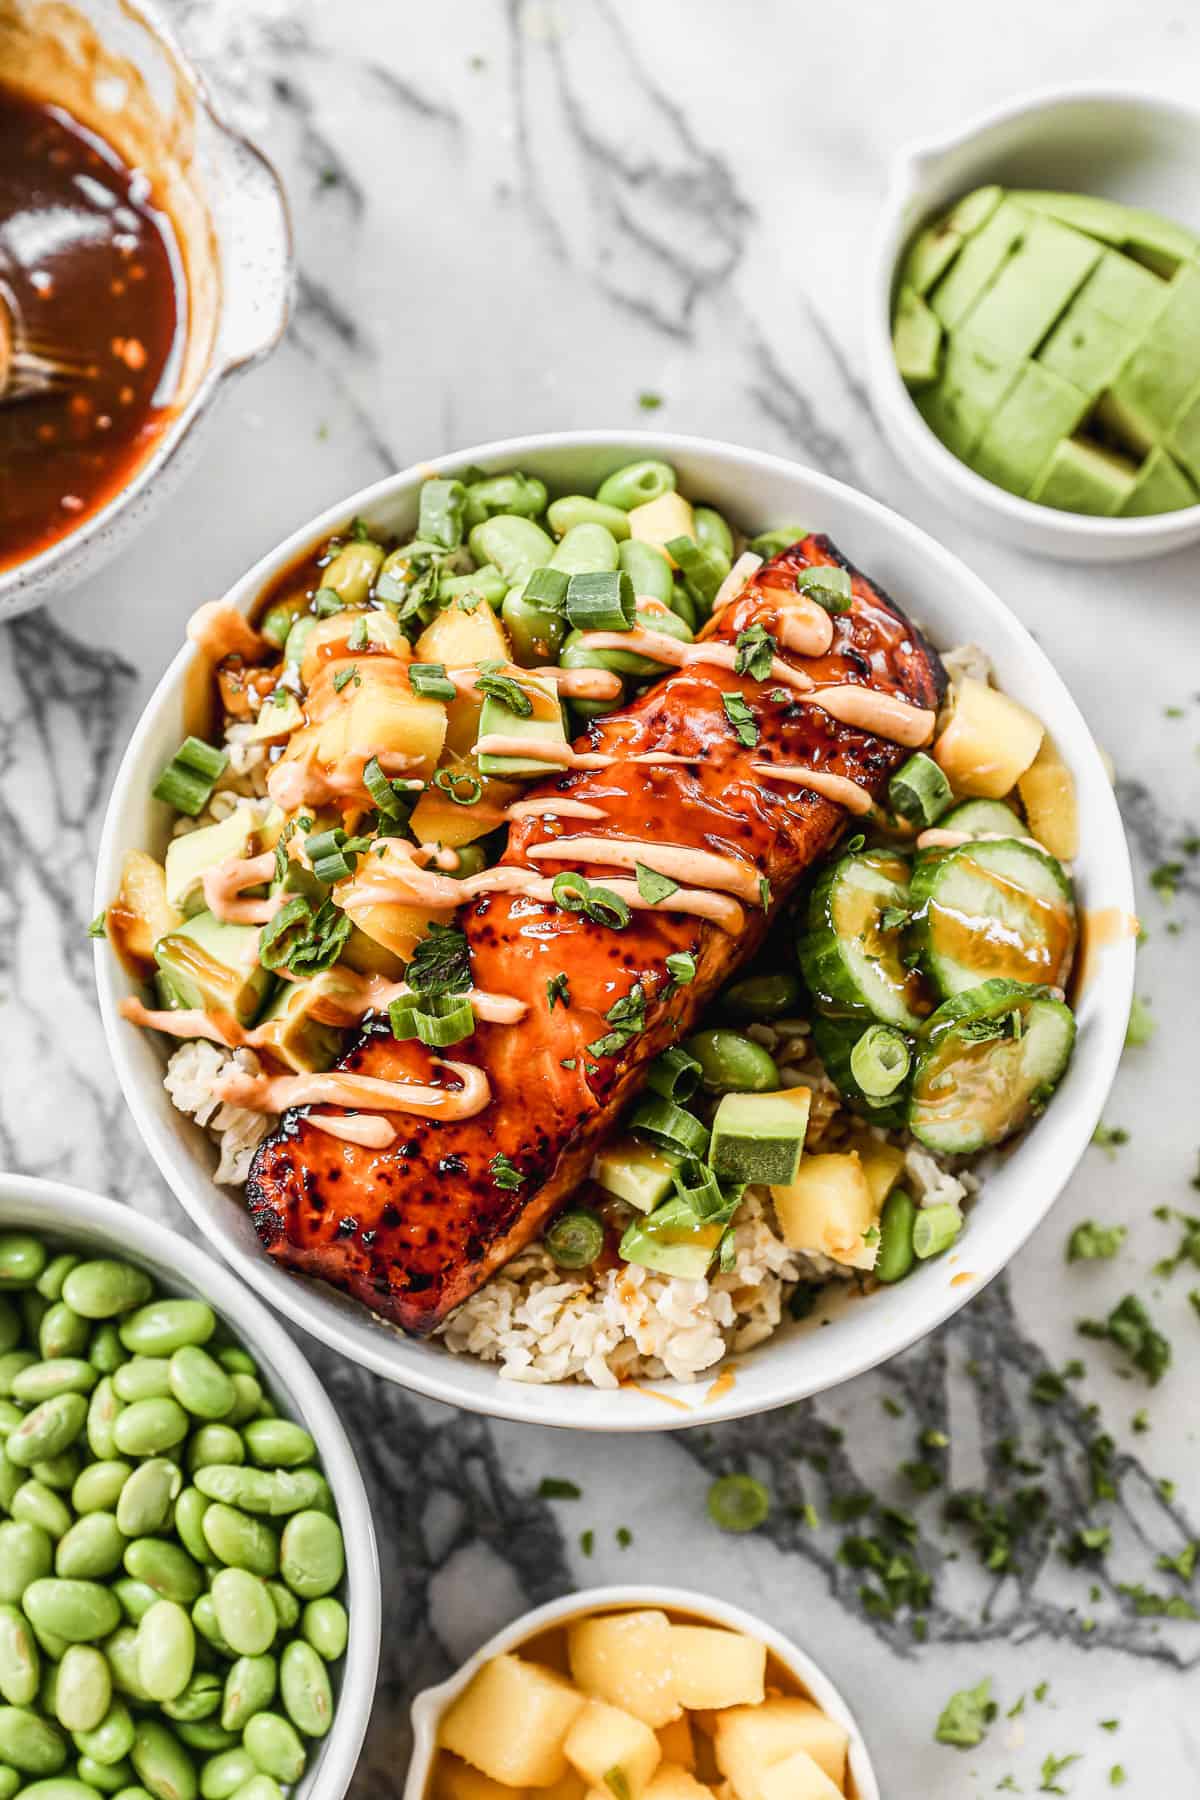 A salmon fillet on a bed of jasmine rice with edamame, mango, avocado, cucumber, green onion, and a drizzle of sriracha mayo.